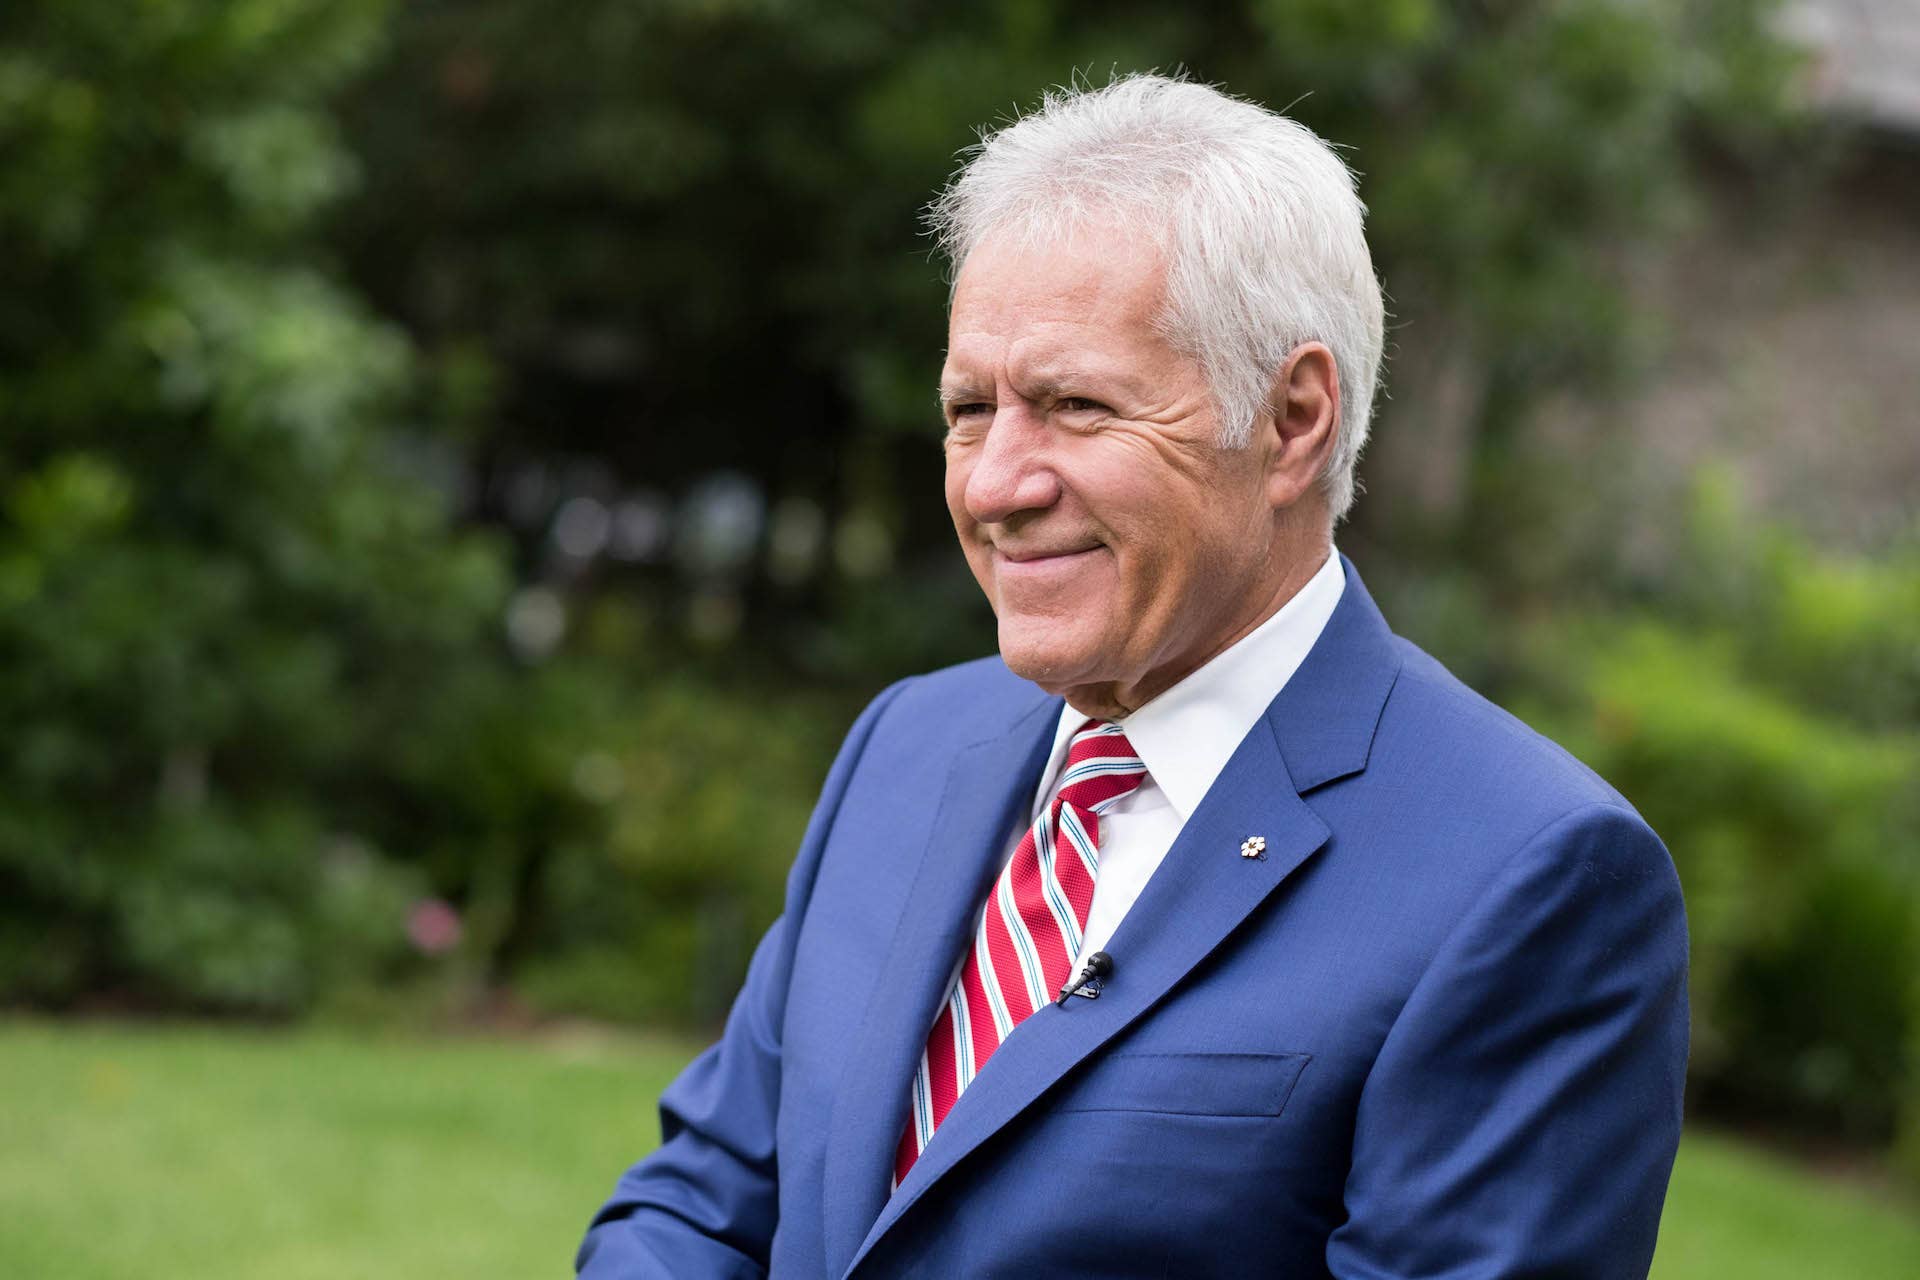 Alex Trebek attends 150th anniversary of Canada's Confederation at the Official Residence of Canada.